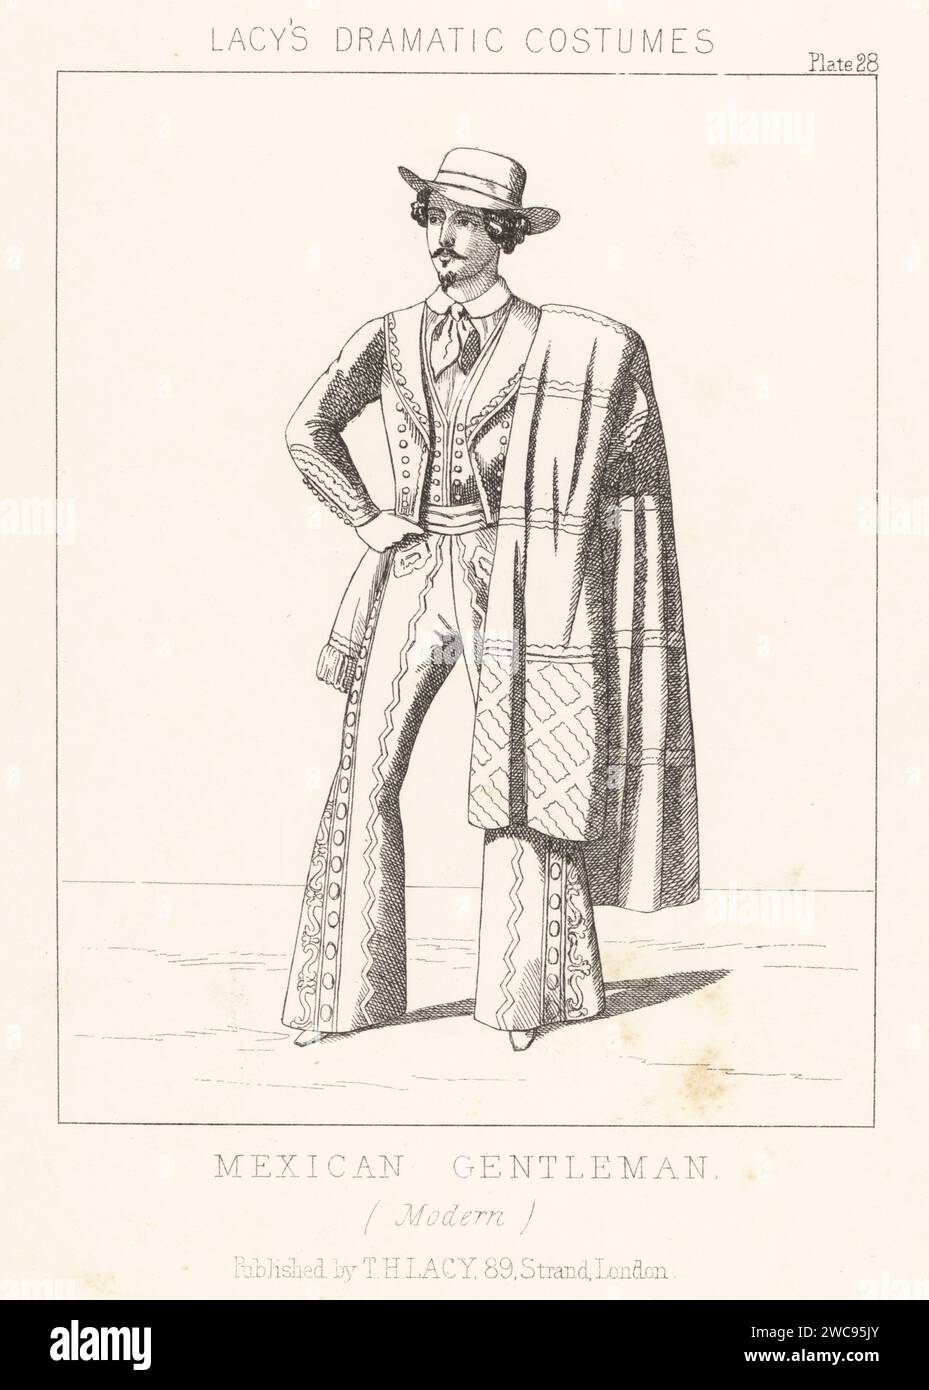 Costume of a Mexican gentleman, 1860s. In hat, embroidered jacket and flared trousers, shirt and cravatte, large shawl over his shoulder. Lithograph from Thomas Hailes Lacy's Male Costumes, Historical, National and Dramatic in 200 Plates, London, 1865. Lacy (1809-1873) was a British actor, playwright, theatrical manager and publisher. Stock Photo